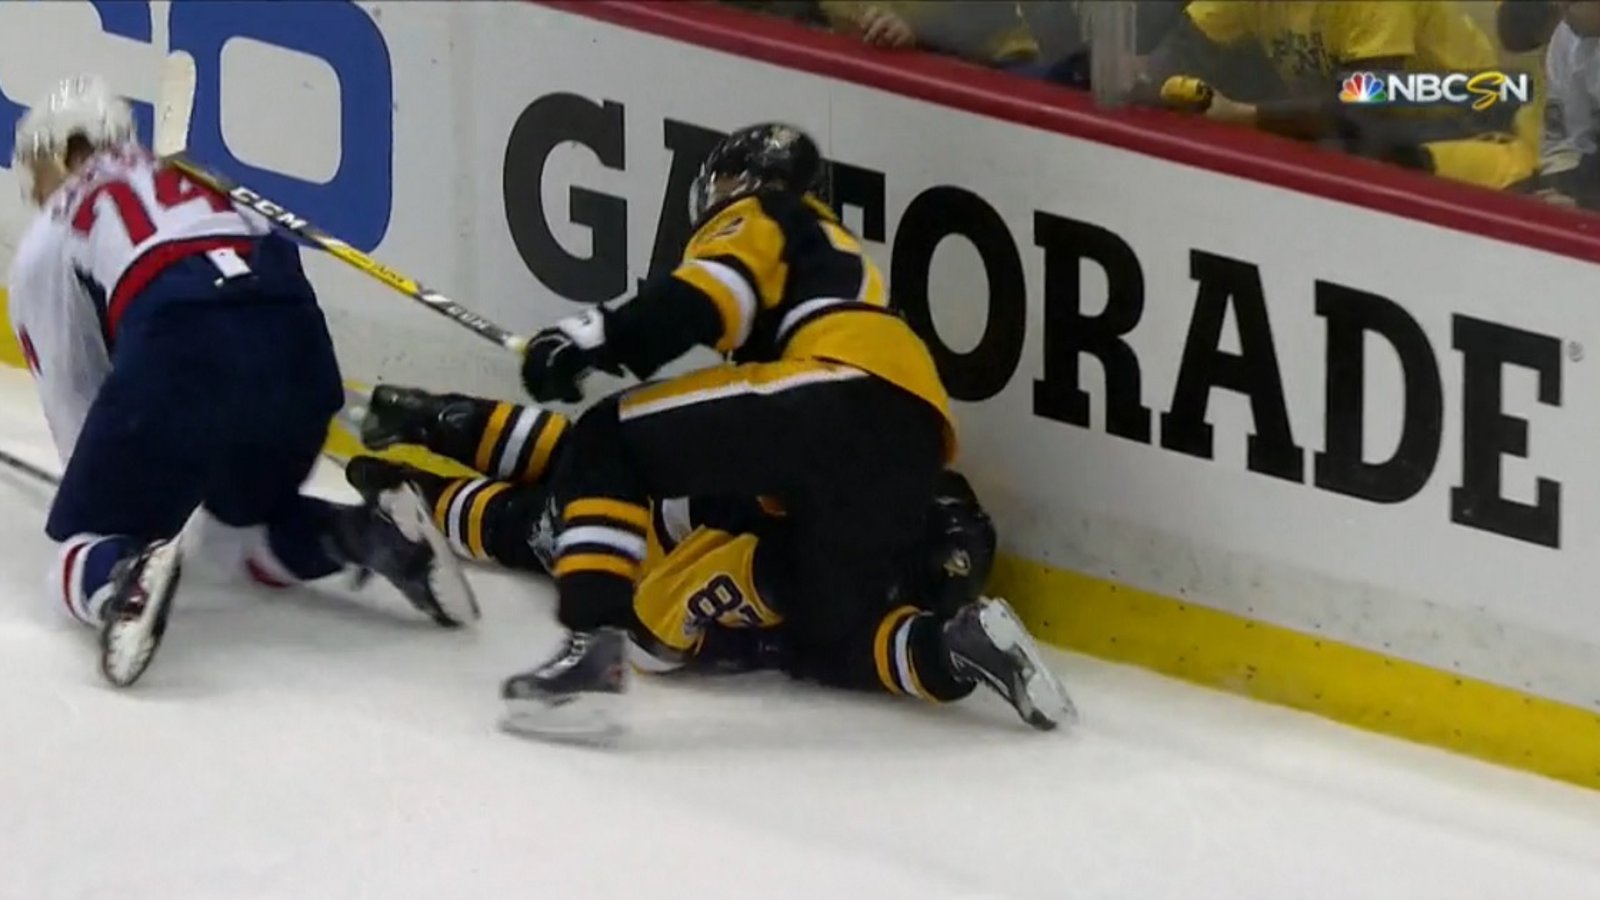 Breaking: Crosby goes head first into the boards after scary collision behind the net.